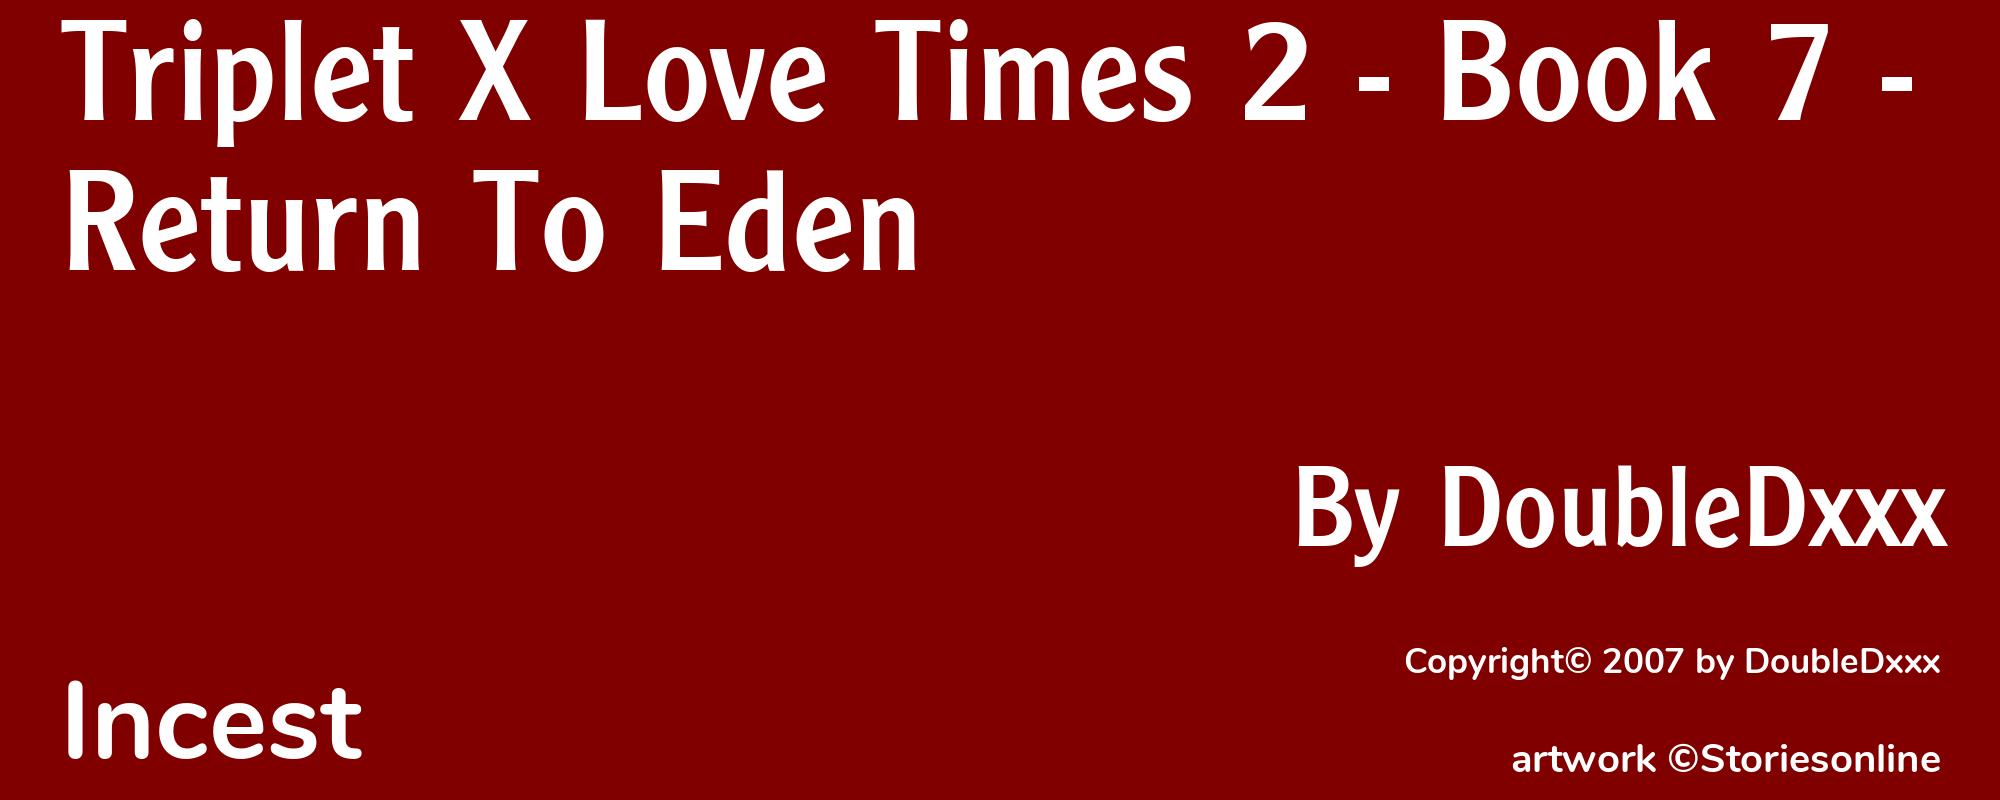 Triplet X Love Times 2 - Book 7 - Return To Eden - Cover